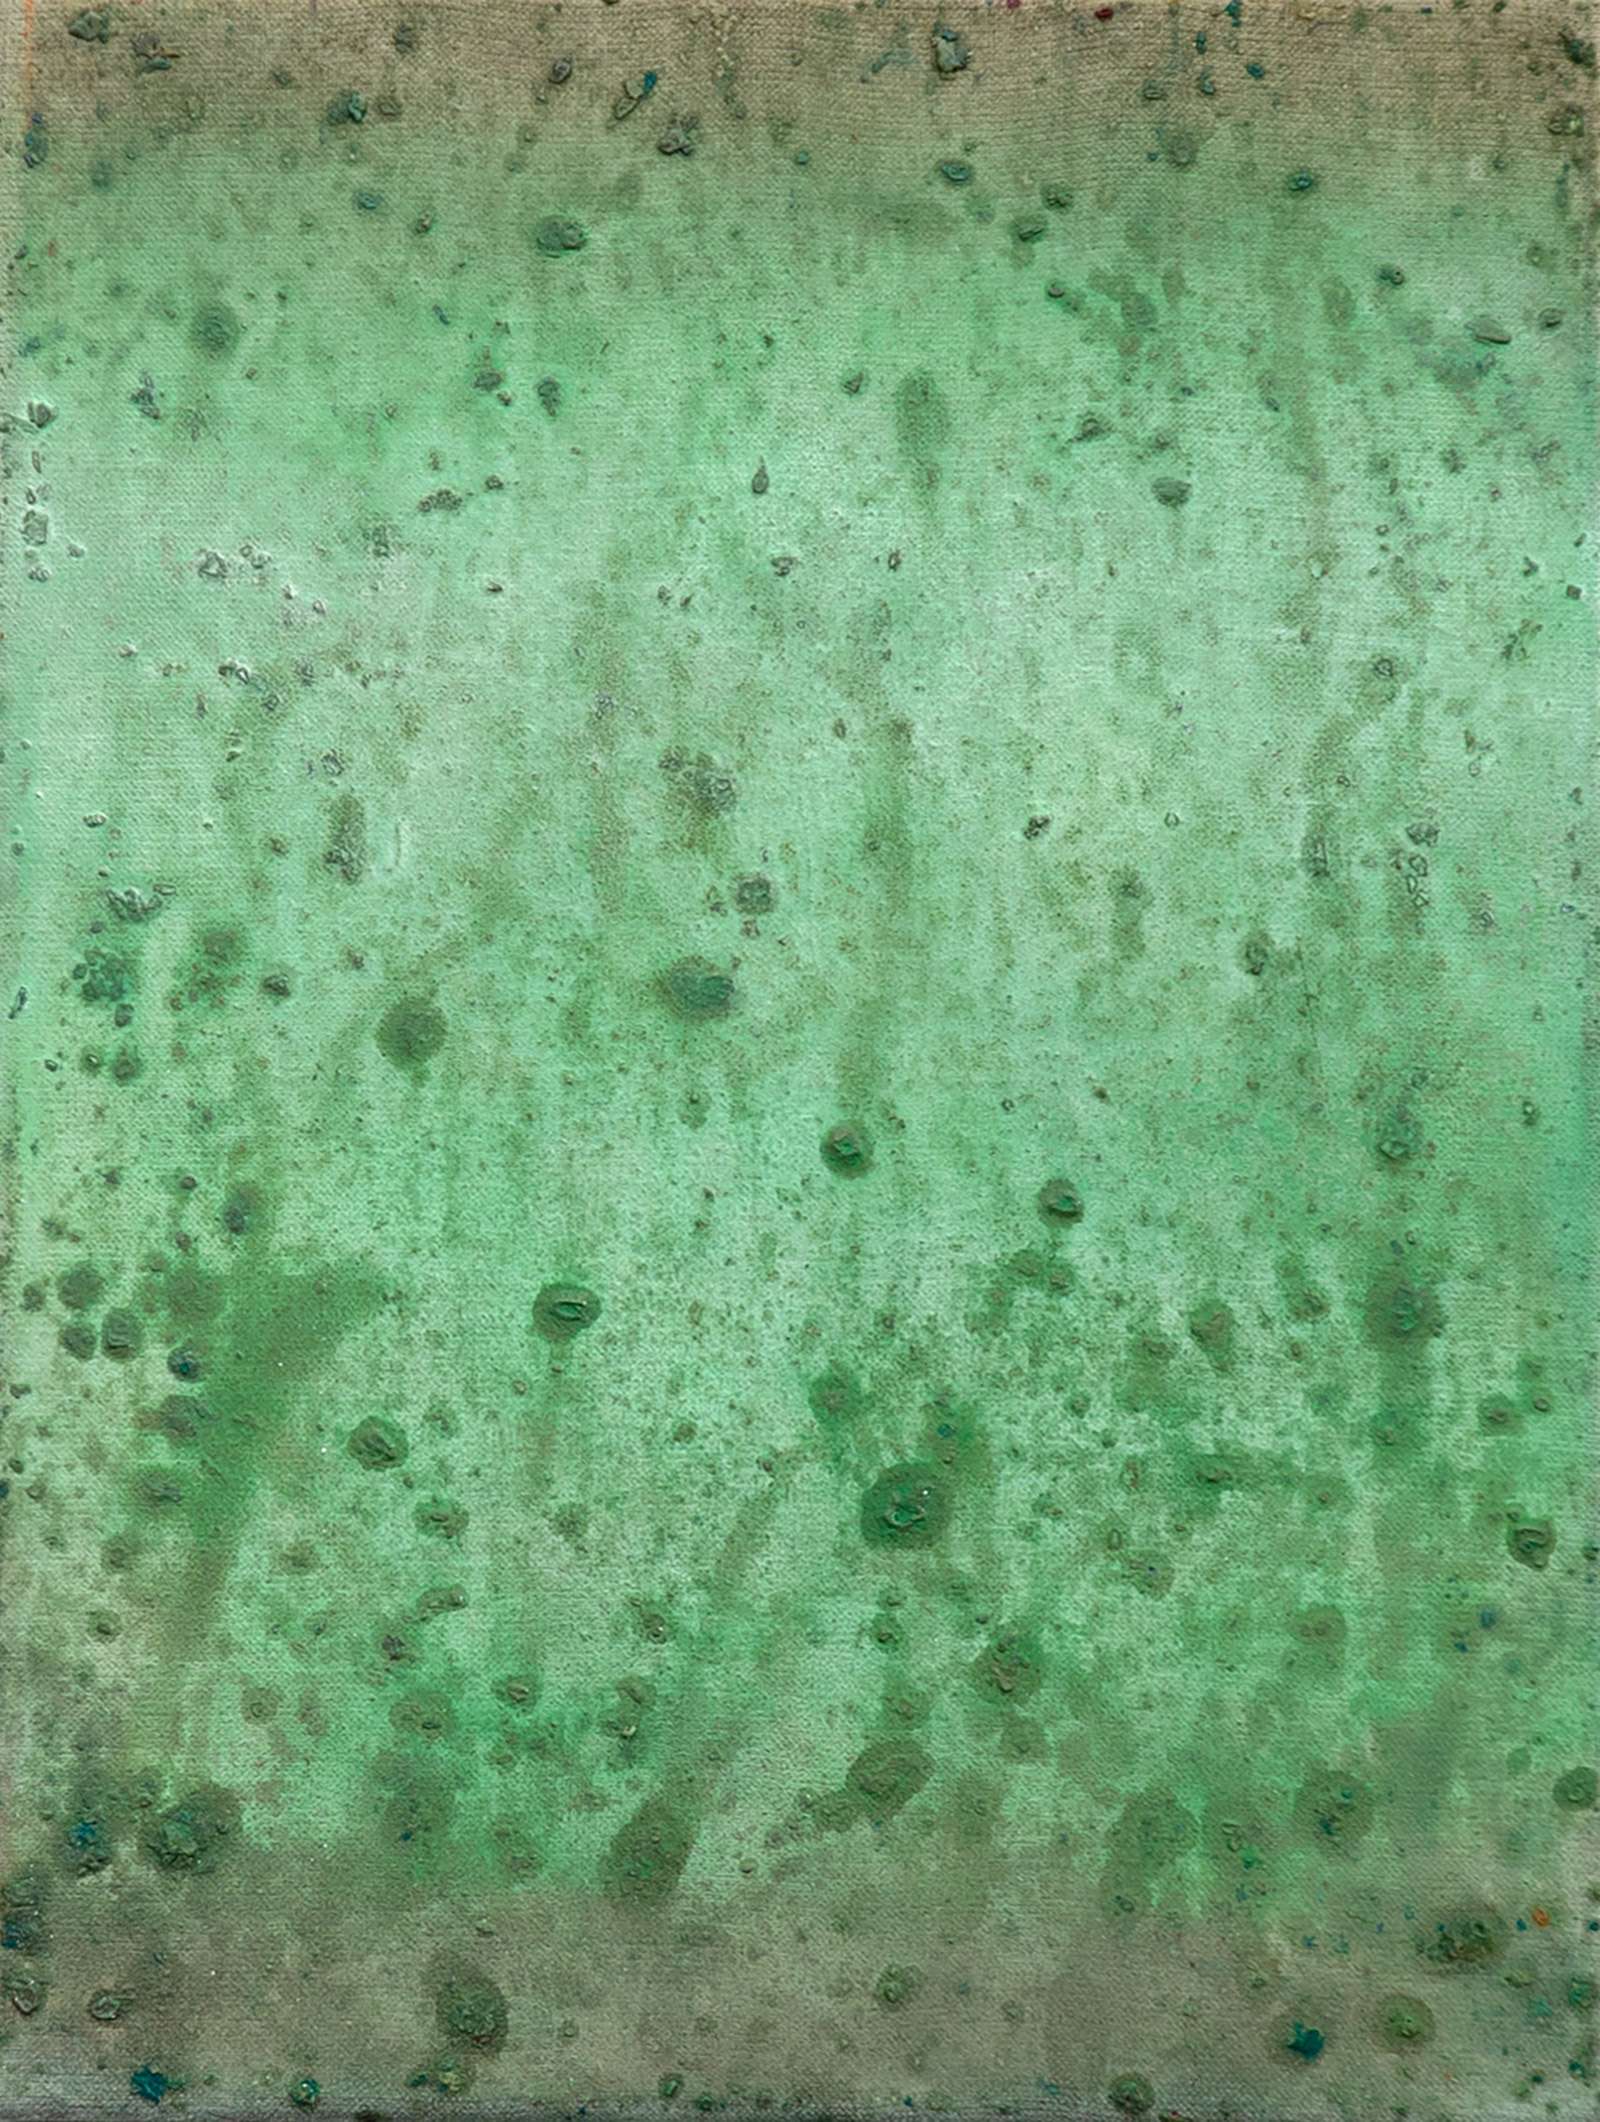 A painting made using ground jadeite minerals, by Weseeclearly